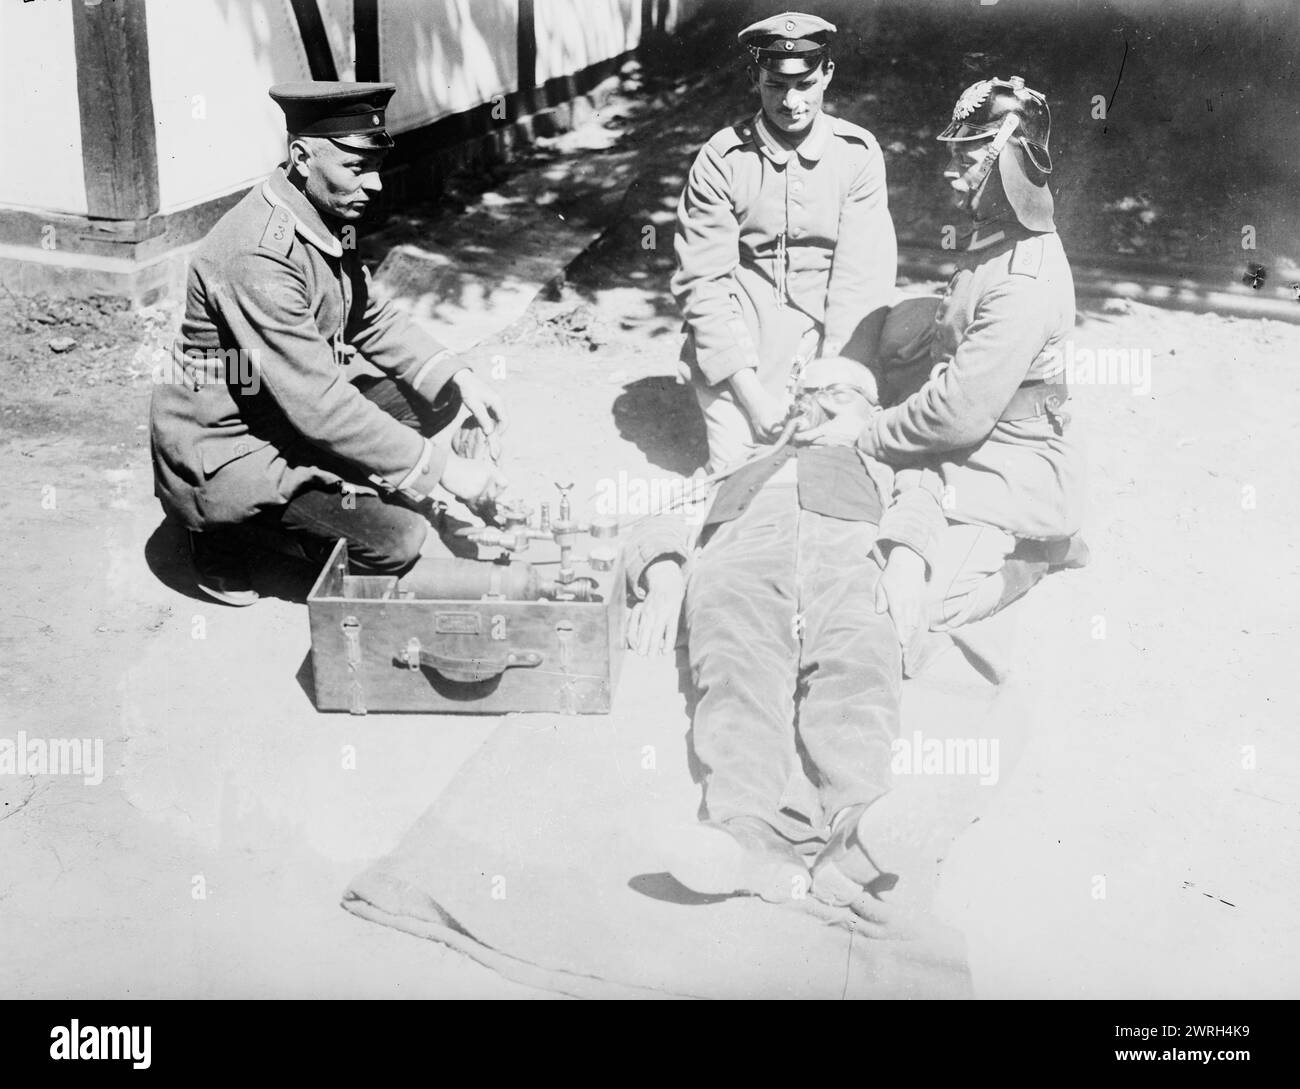 Reviving wounded German with Pulmotor, between 1914 and c1915. A German being revived with a Pulmotor, an artificial respiration device, during World War I. Stock Photo